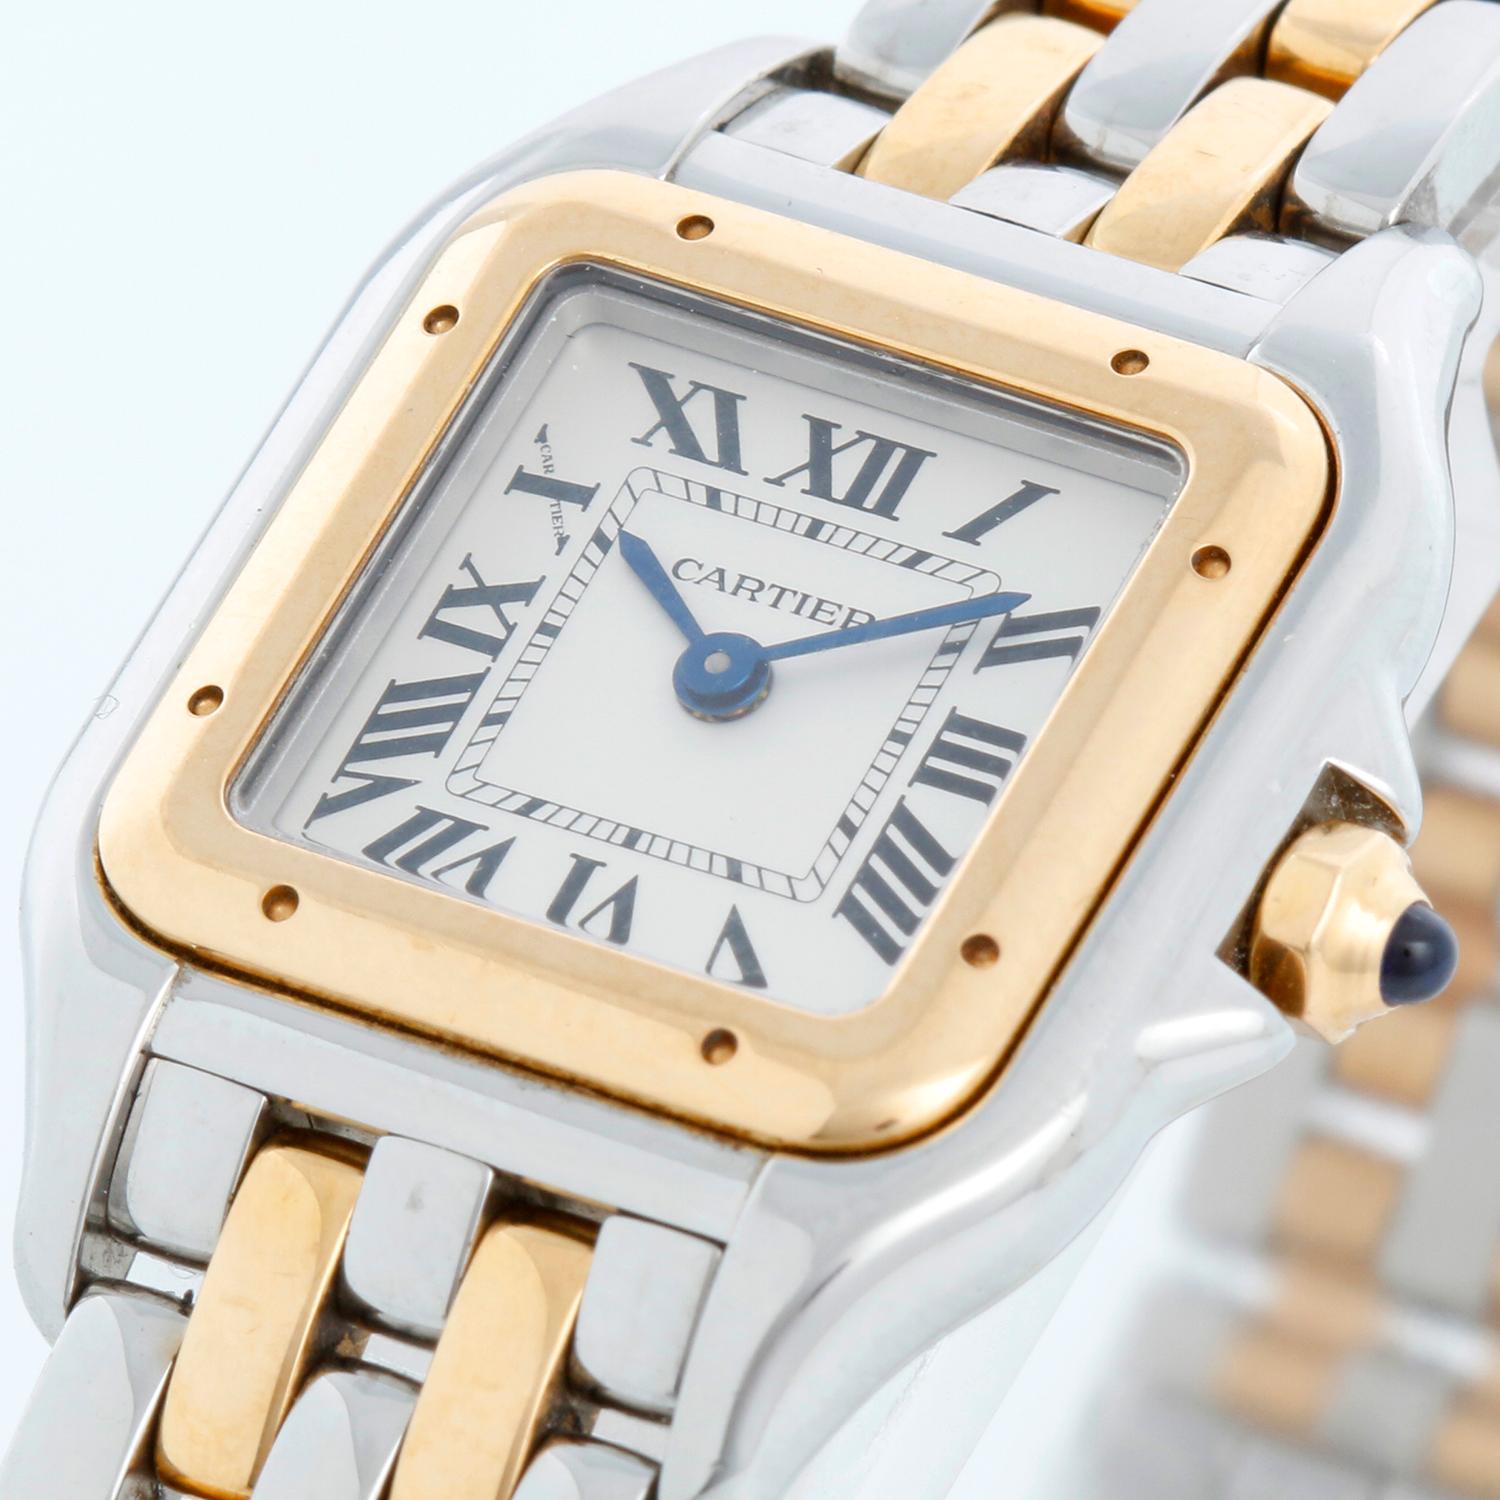 Cartier Panther Small 2-Tone Steel & Gold Panthere Watch 4023 W2PN0006 1